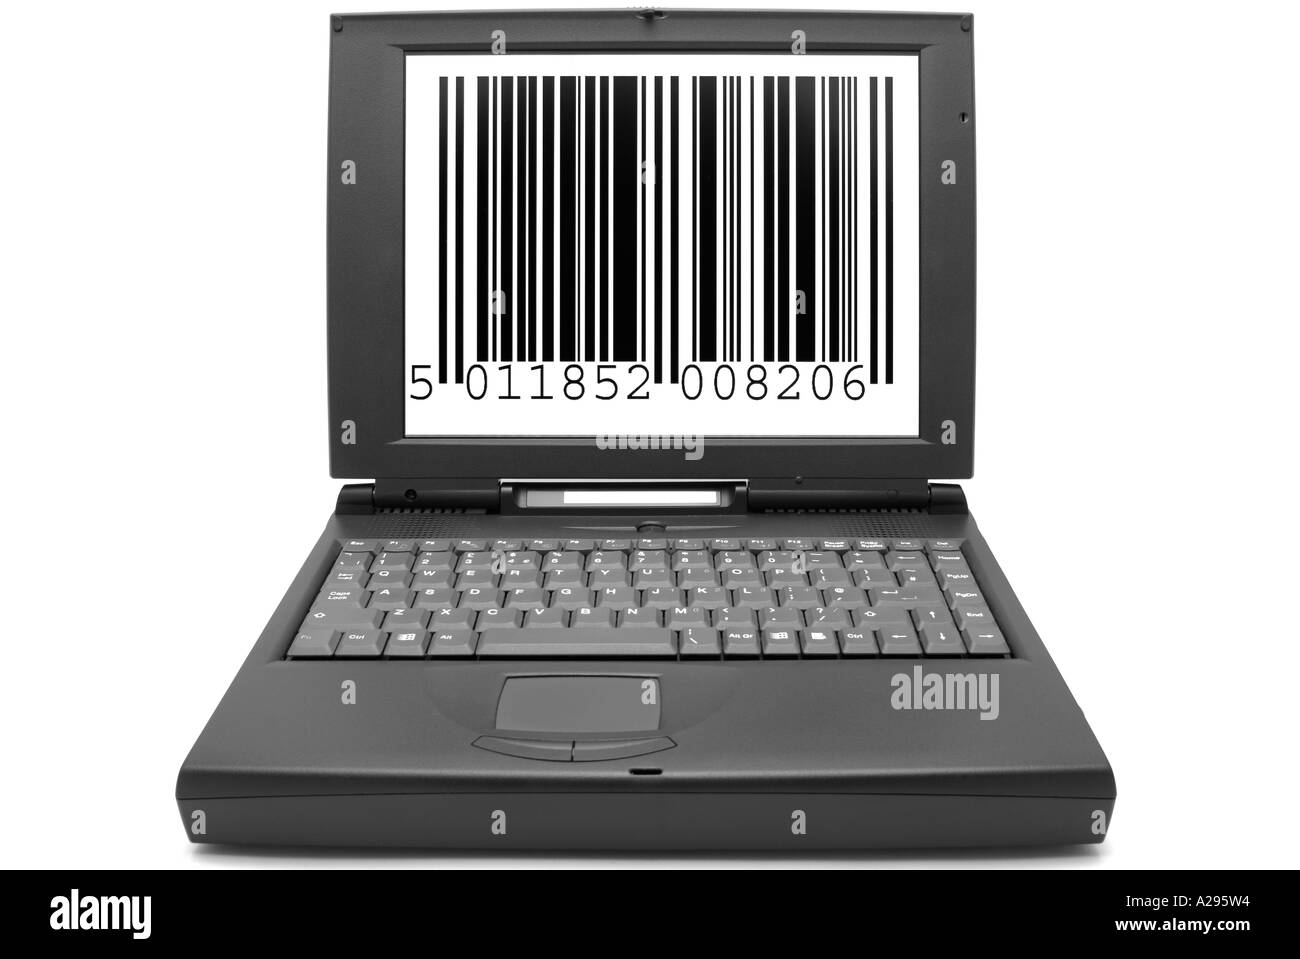 Laptop Computer with a Barcode Displayed on the Monitor Stock Photo